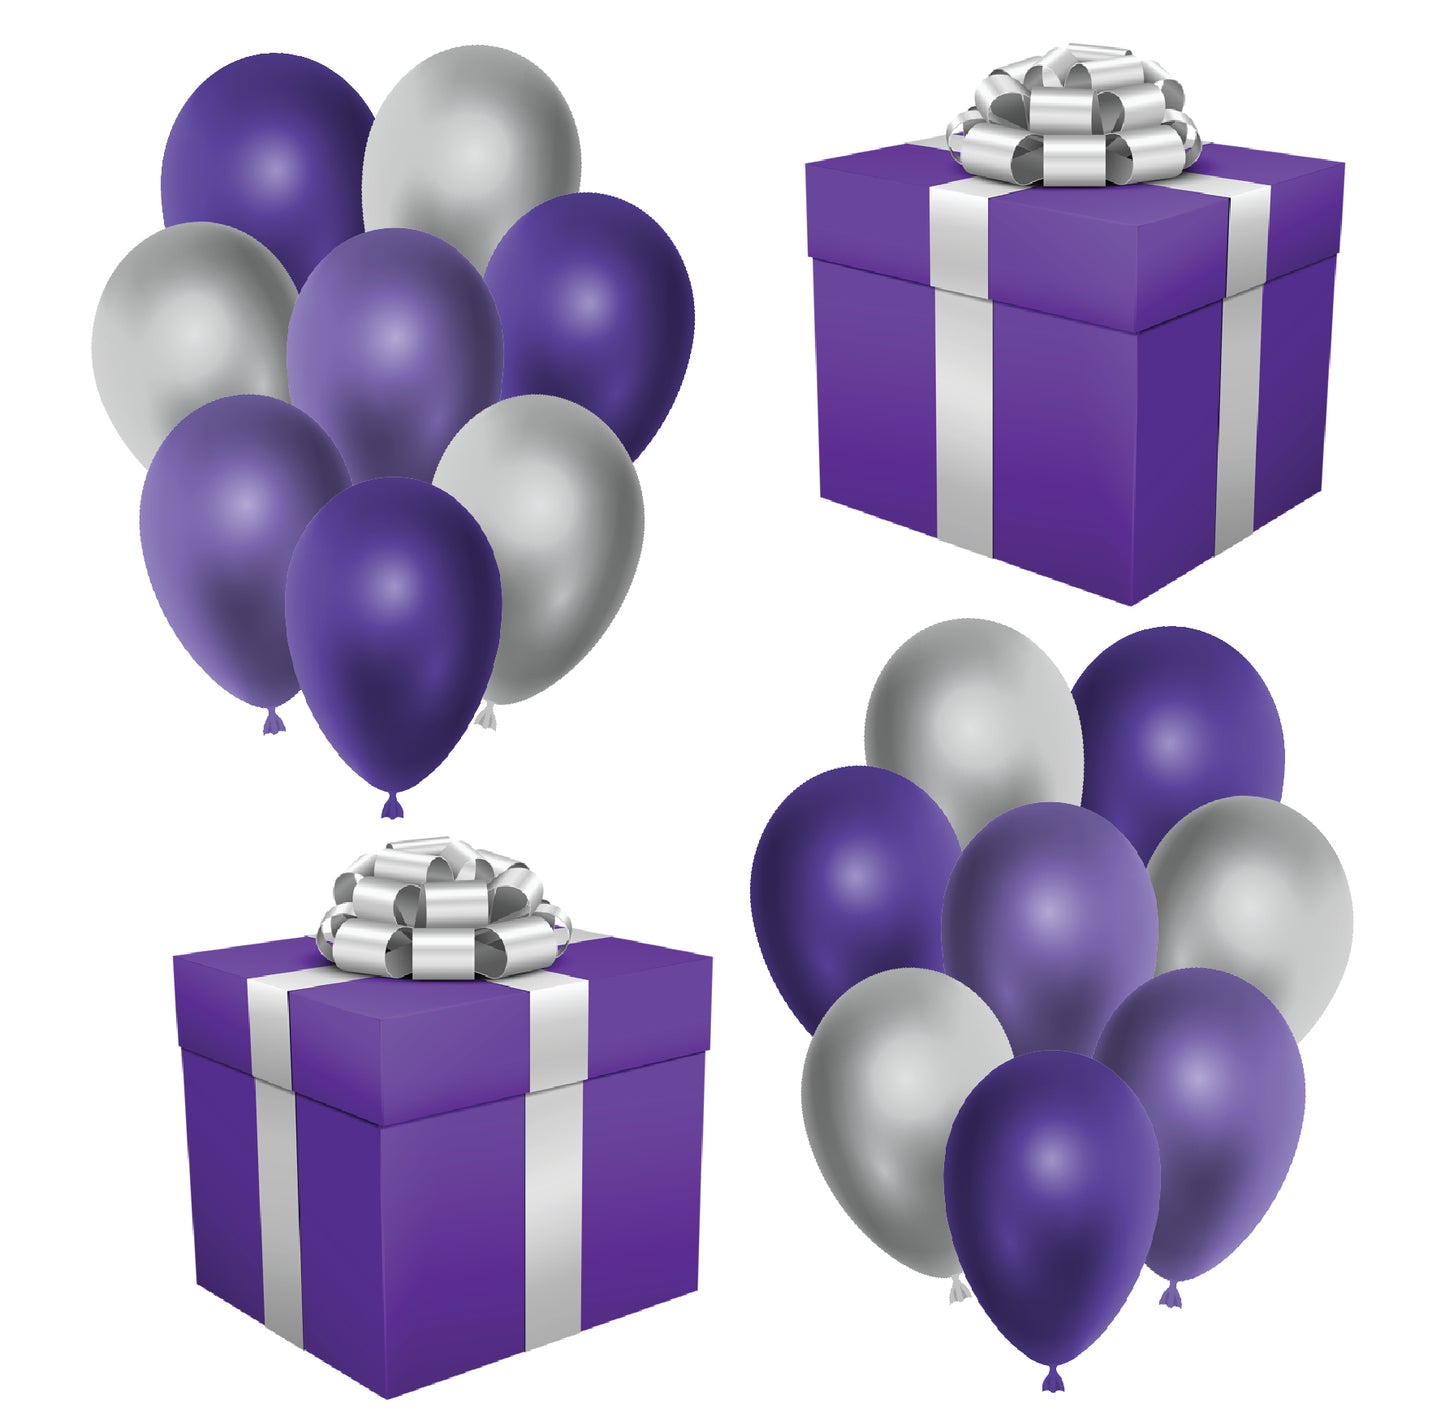 Dark Purple Balloons Half Sheet  (Must Purchase 2 Half sheets - You Can Mix & Match)